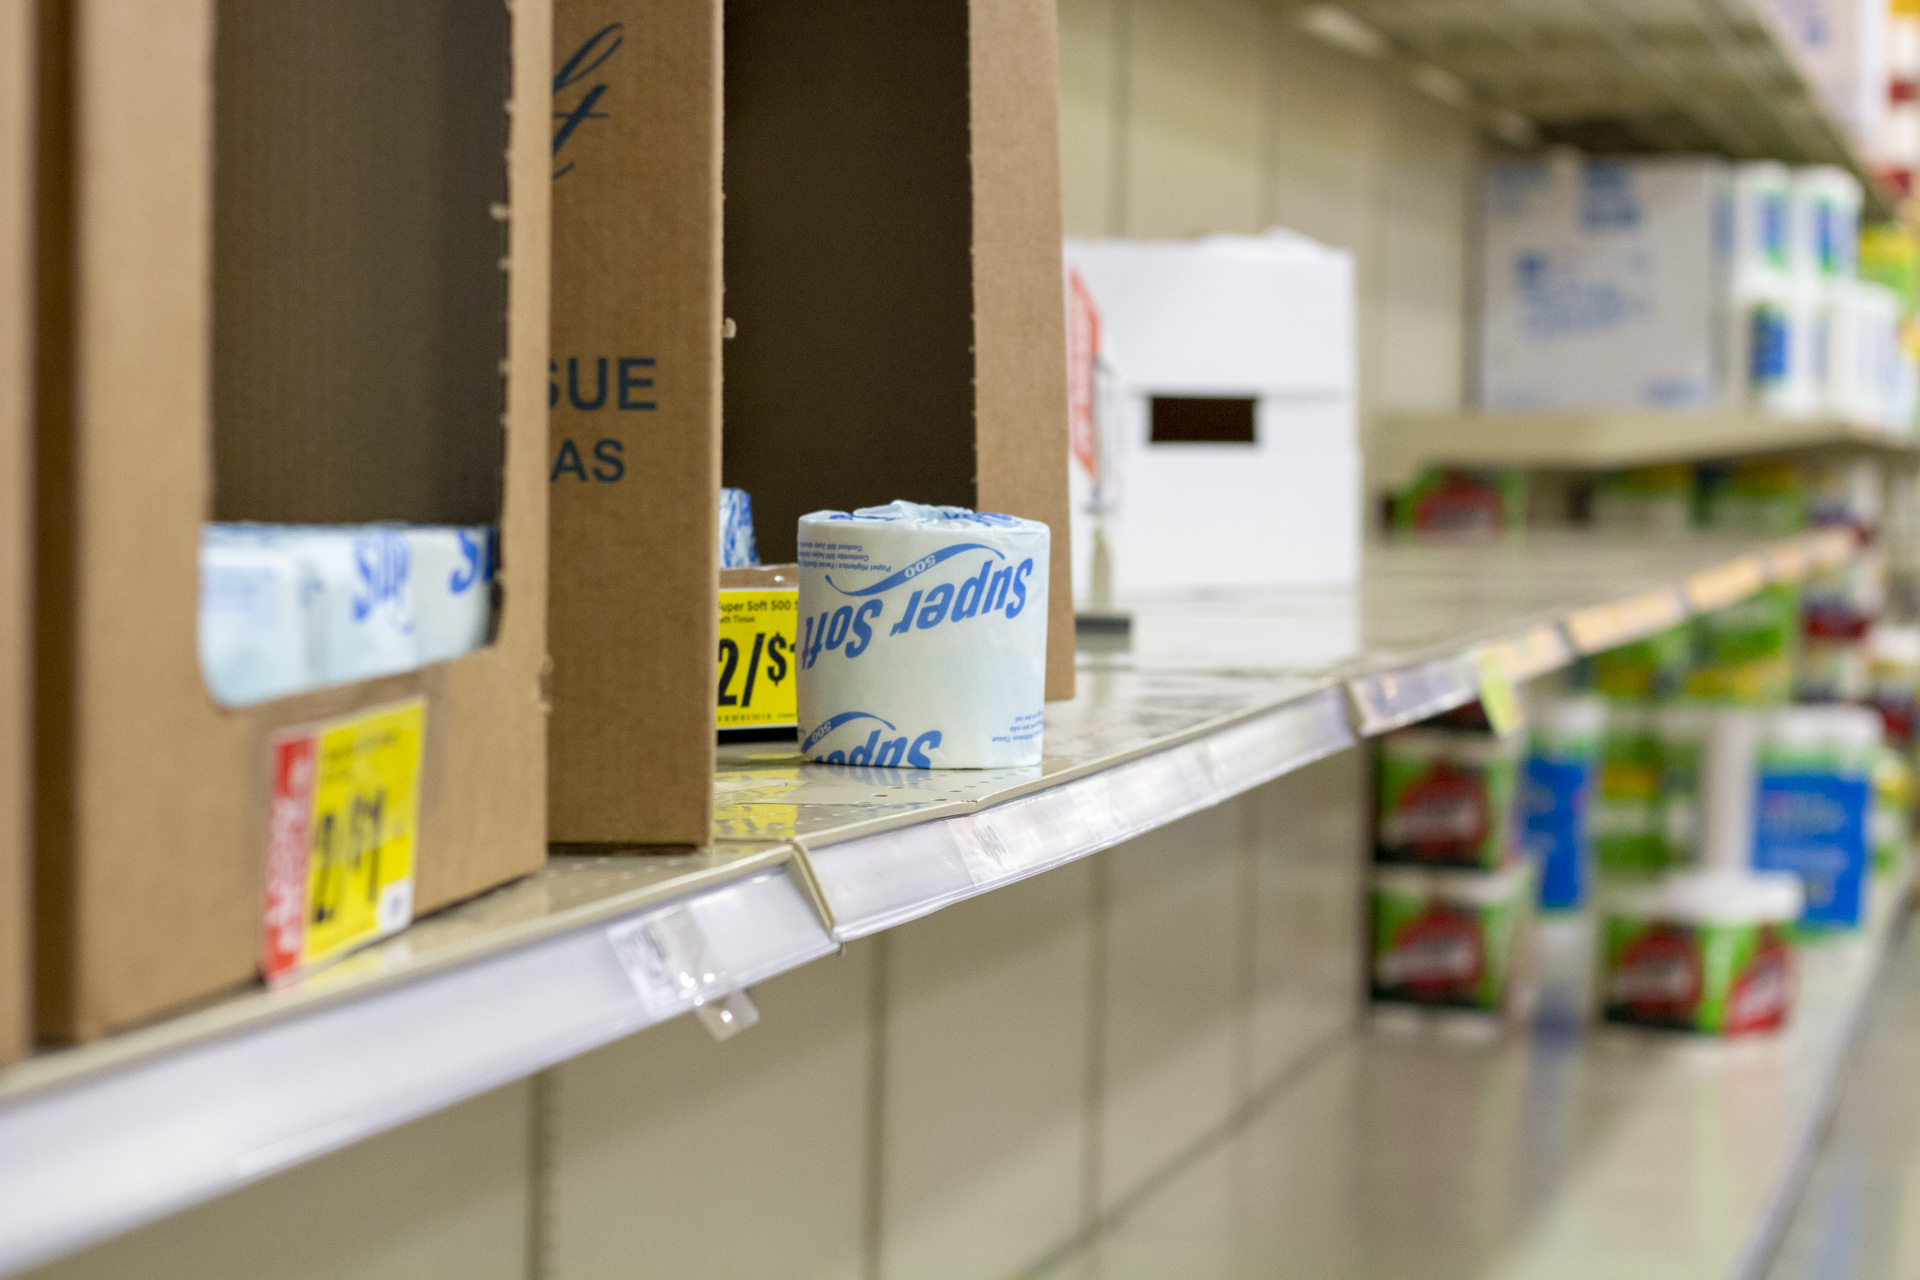 The toilet paper aisle at HEB wiped clean with just a handful of single rolls left to sell. When the World Health Organization declared the coronavirus a global pandemic, people all over the United States began emptying grocery store shelves. | Katrina Martinez/The Cougar